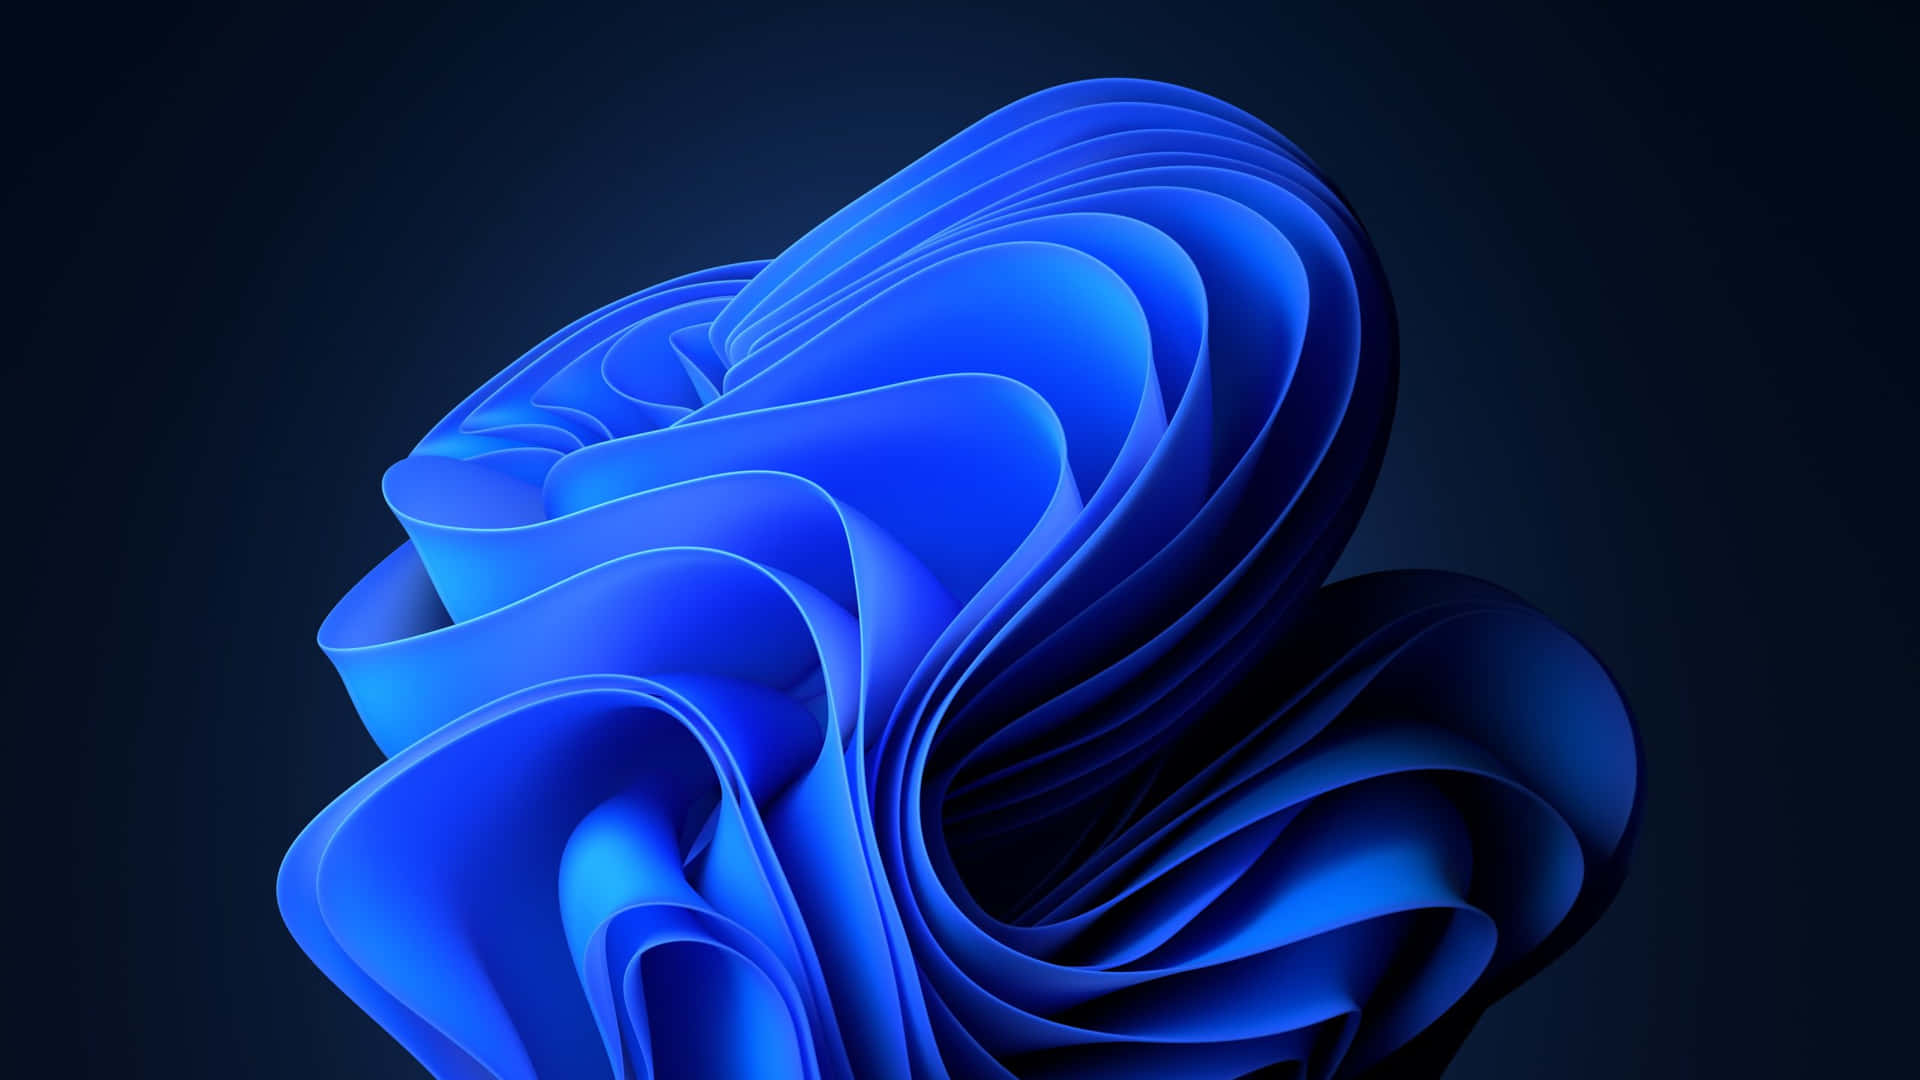 Blue Whirl Screen Saver Picture